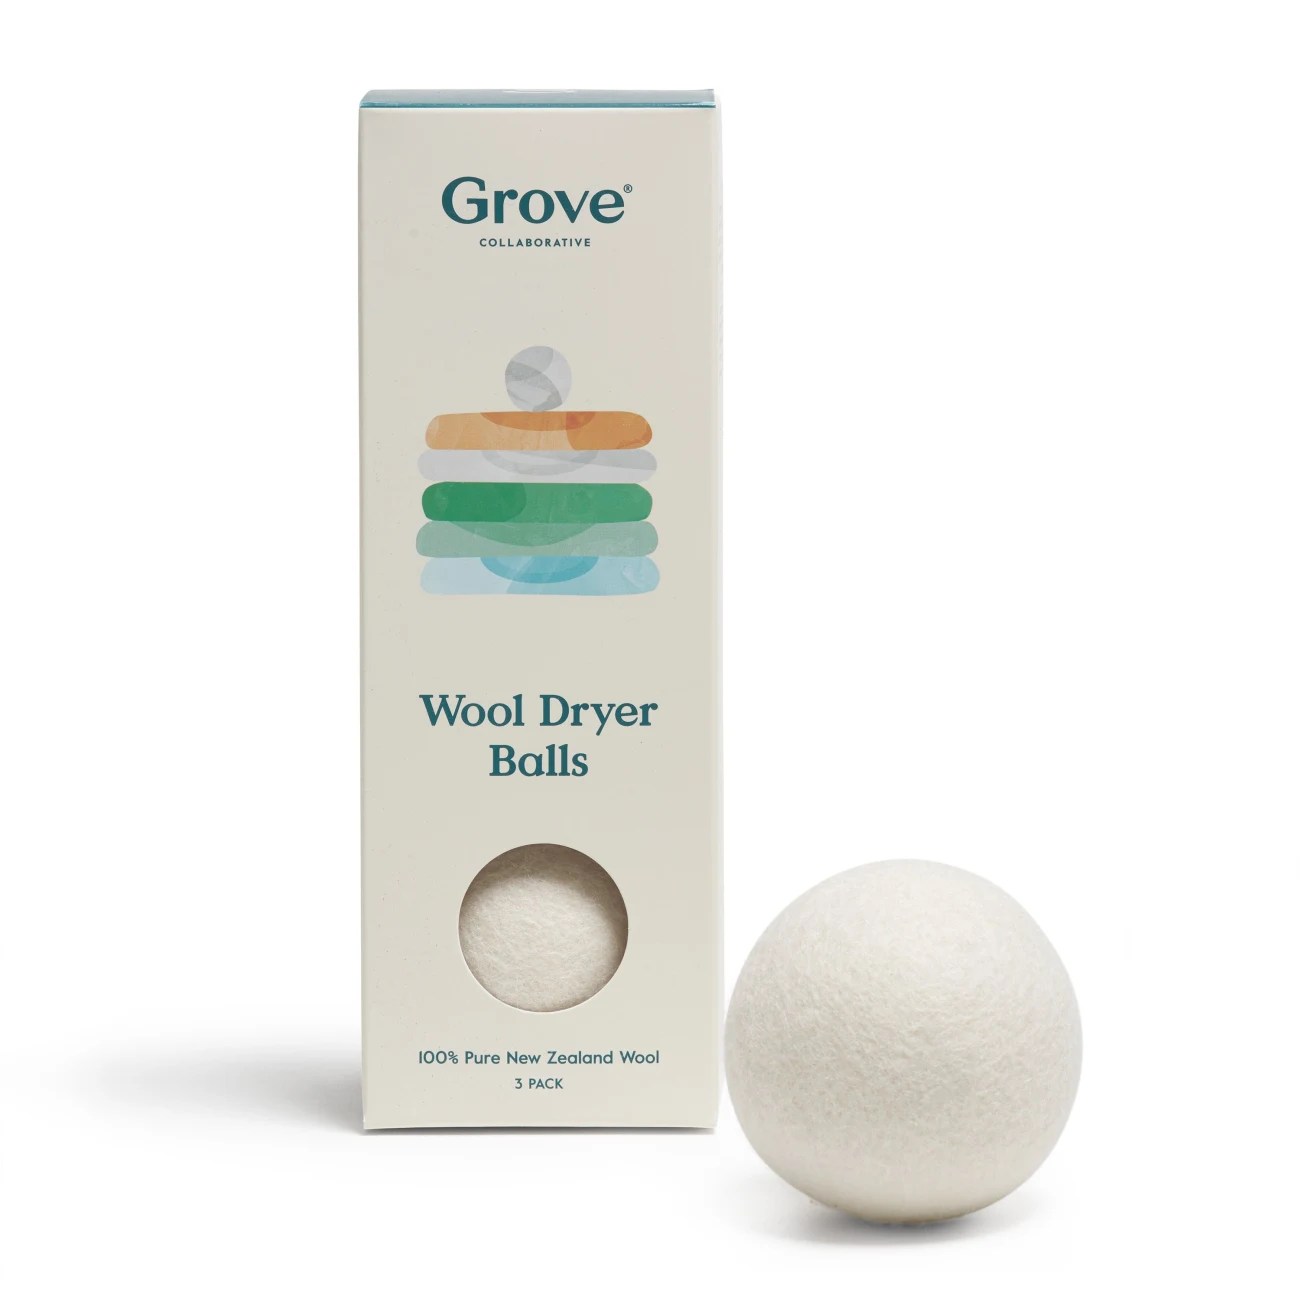 grove collaborative wool dryer balls, celebrity cleaning brands